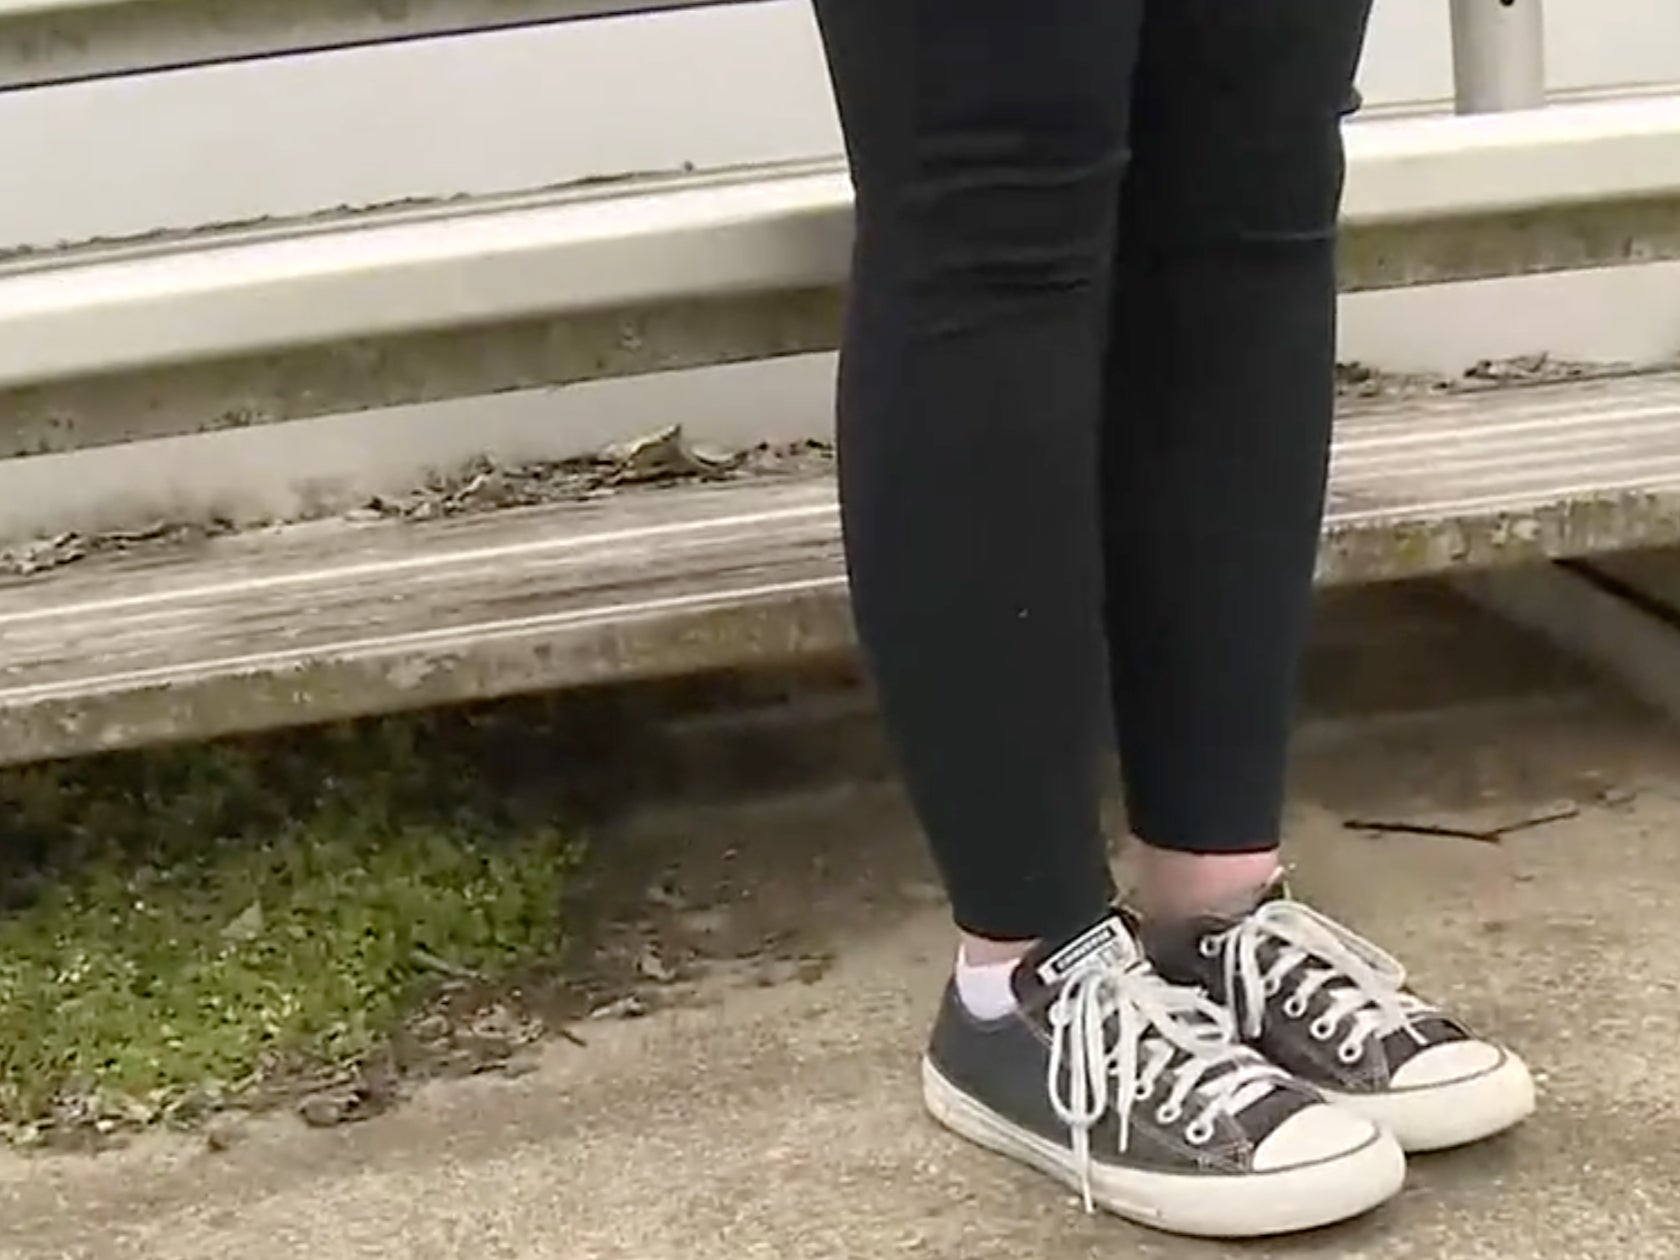 Schoolgirl thrown out of class for wearing leggings, The Independent